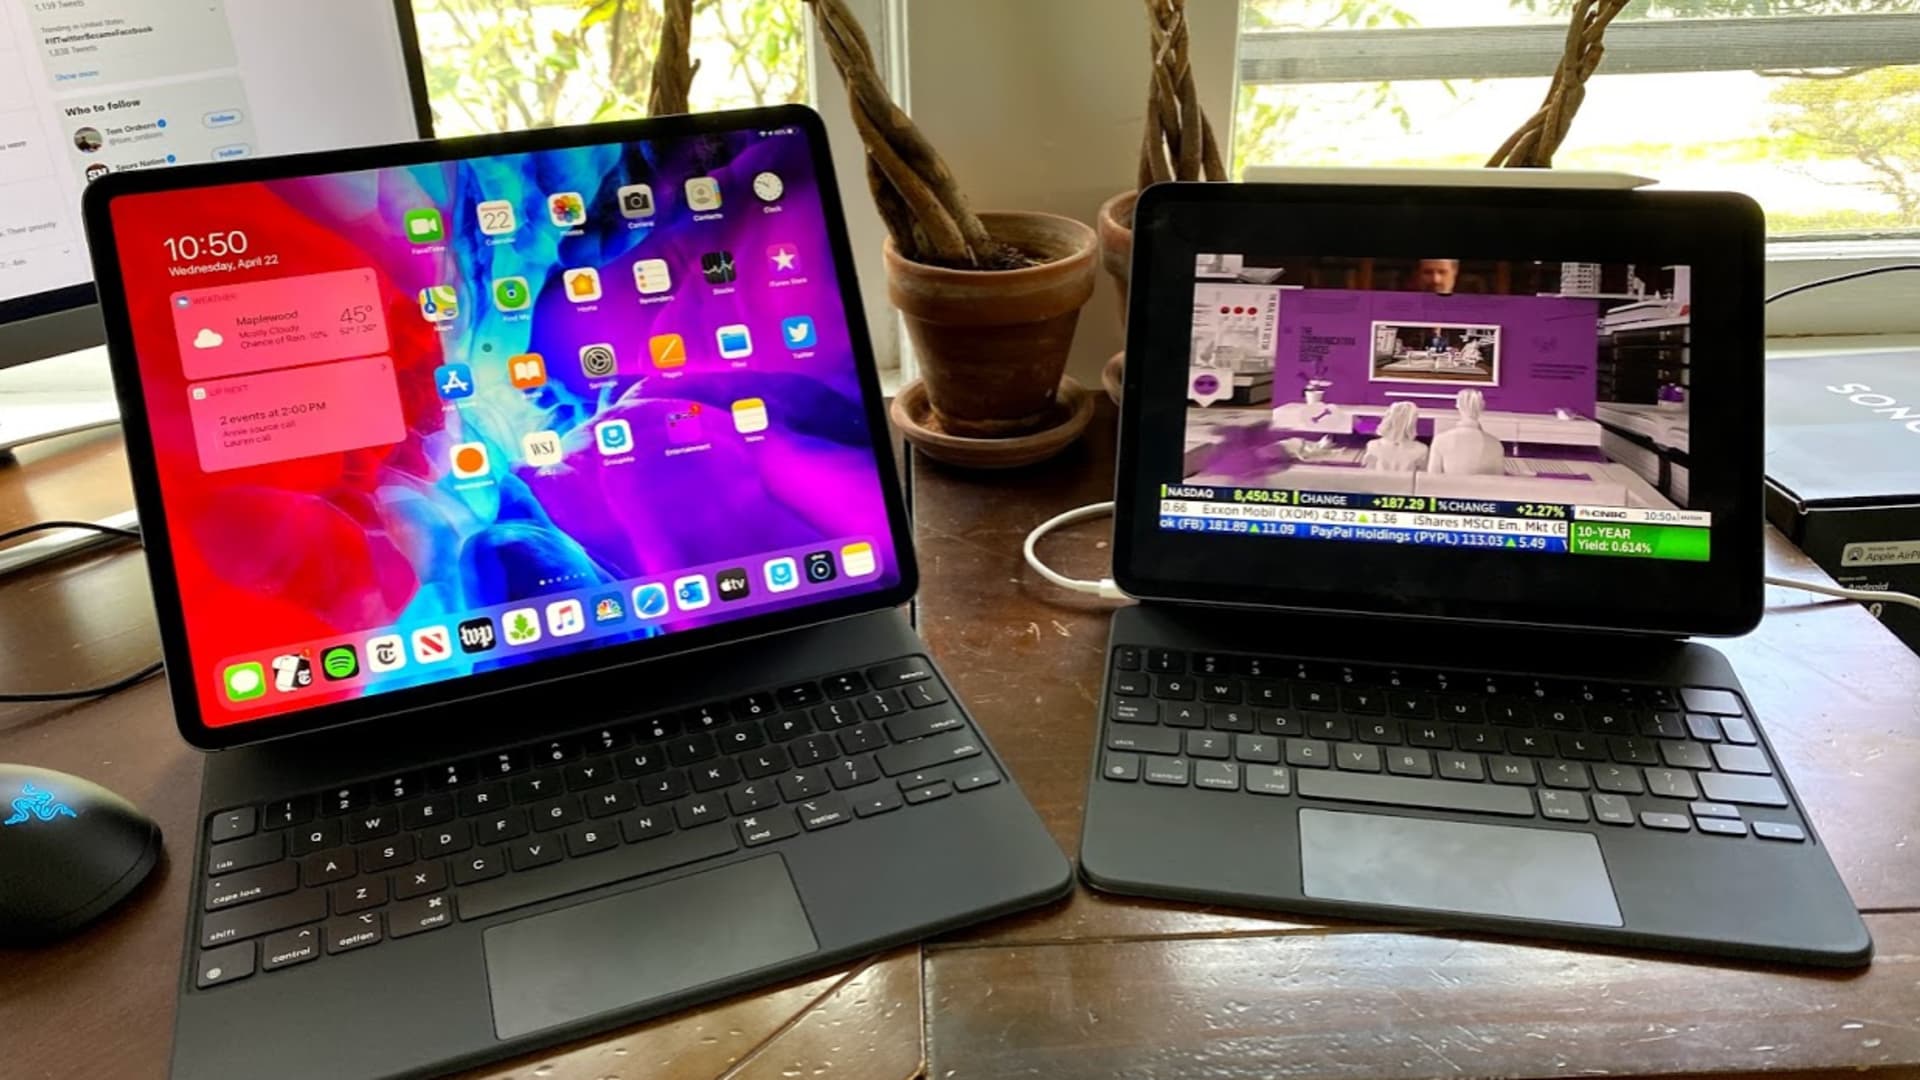 New and used iPad Pro Keyboards for sale, Facebook Marketplace